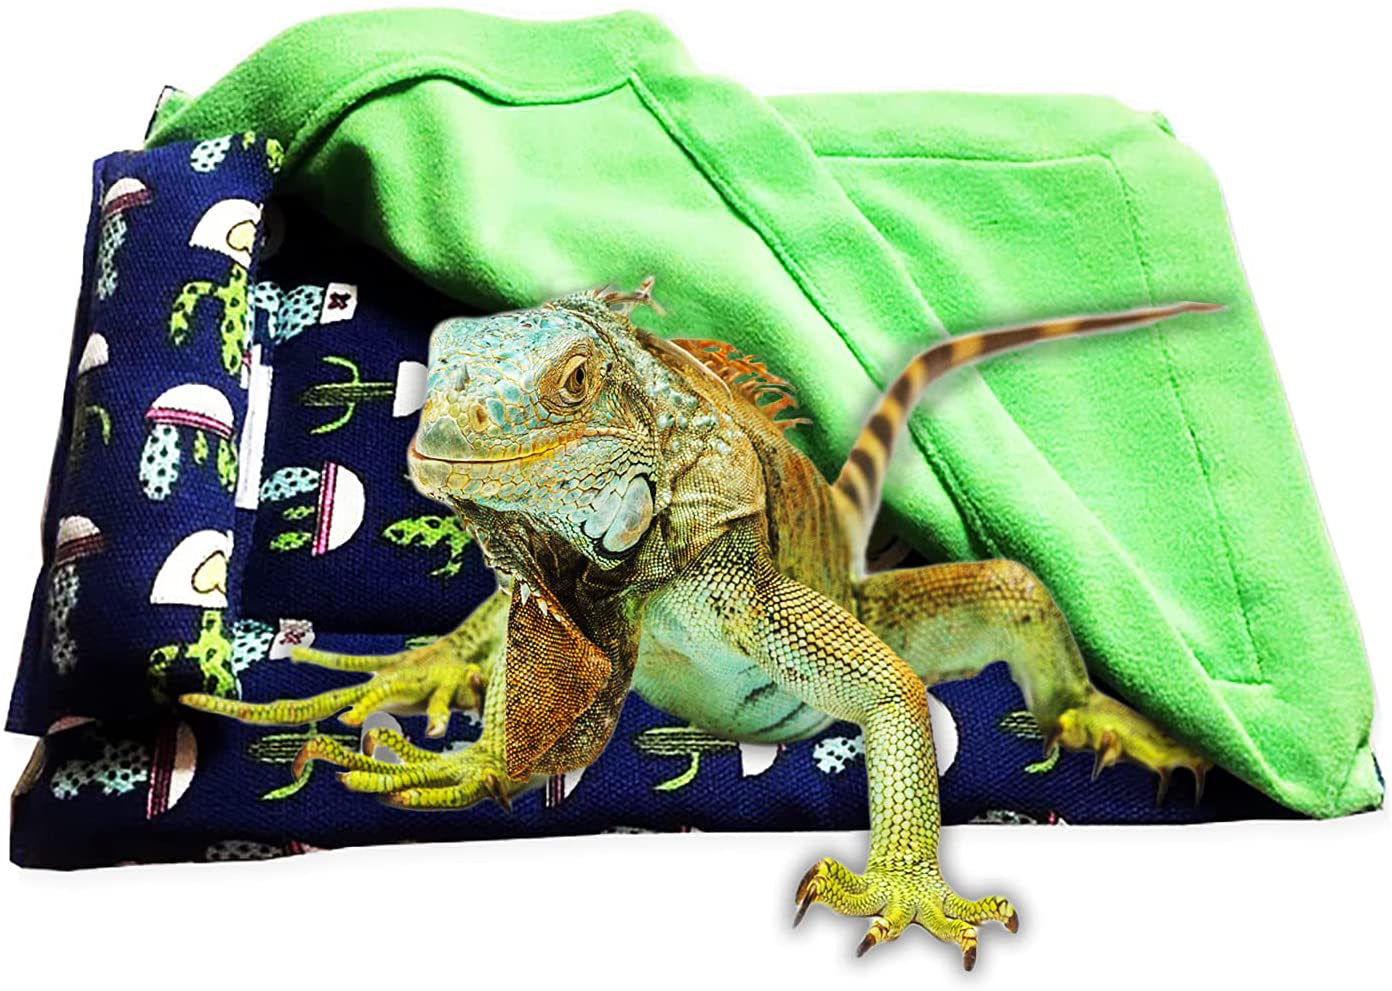 Reptile Sleeping Bag, Bearded Dragon Accessories, Bearded Dragon Bed with Pillow and Blanket, Lizard Hideout Habitat with Soft Warm Small Animal Sleep Bag Set